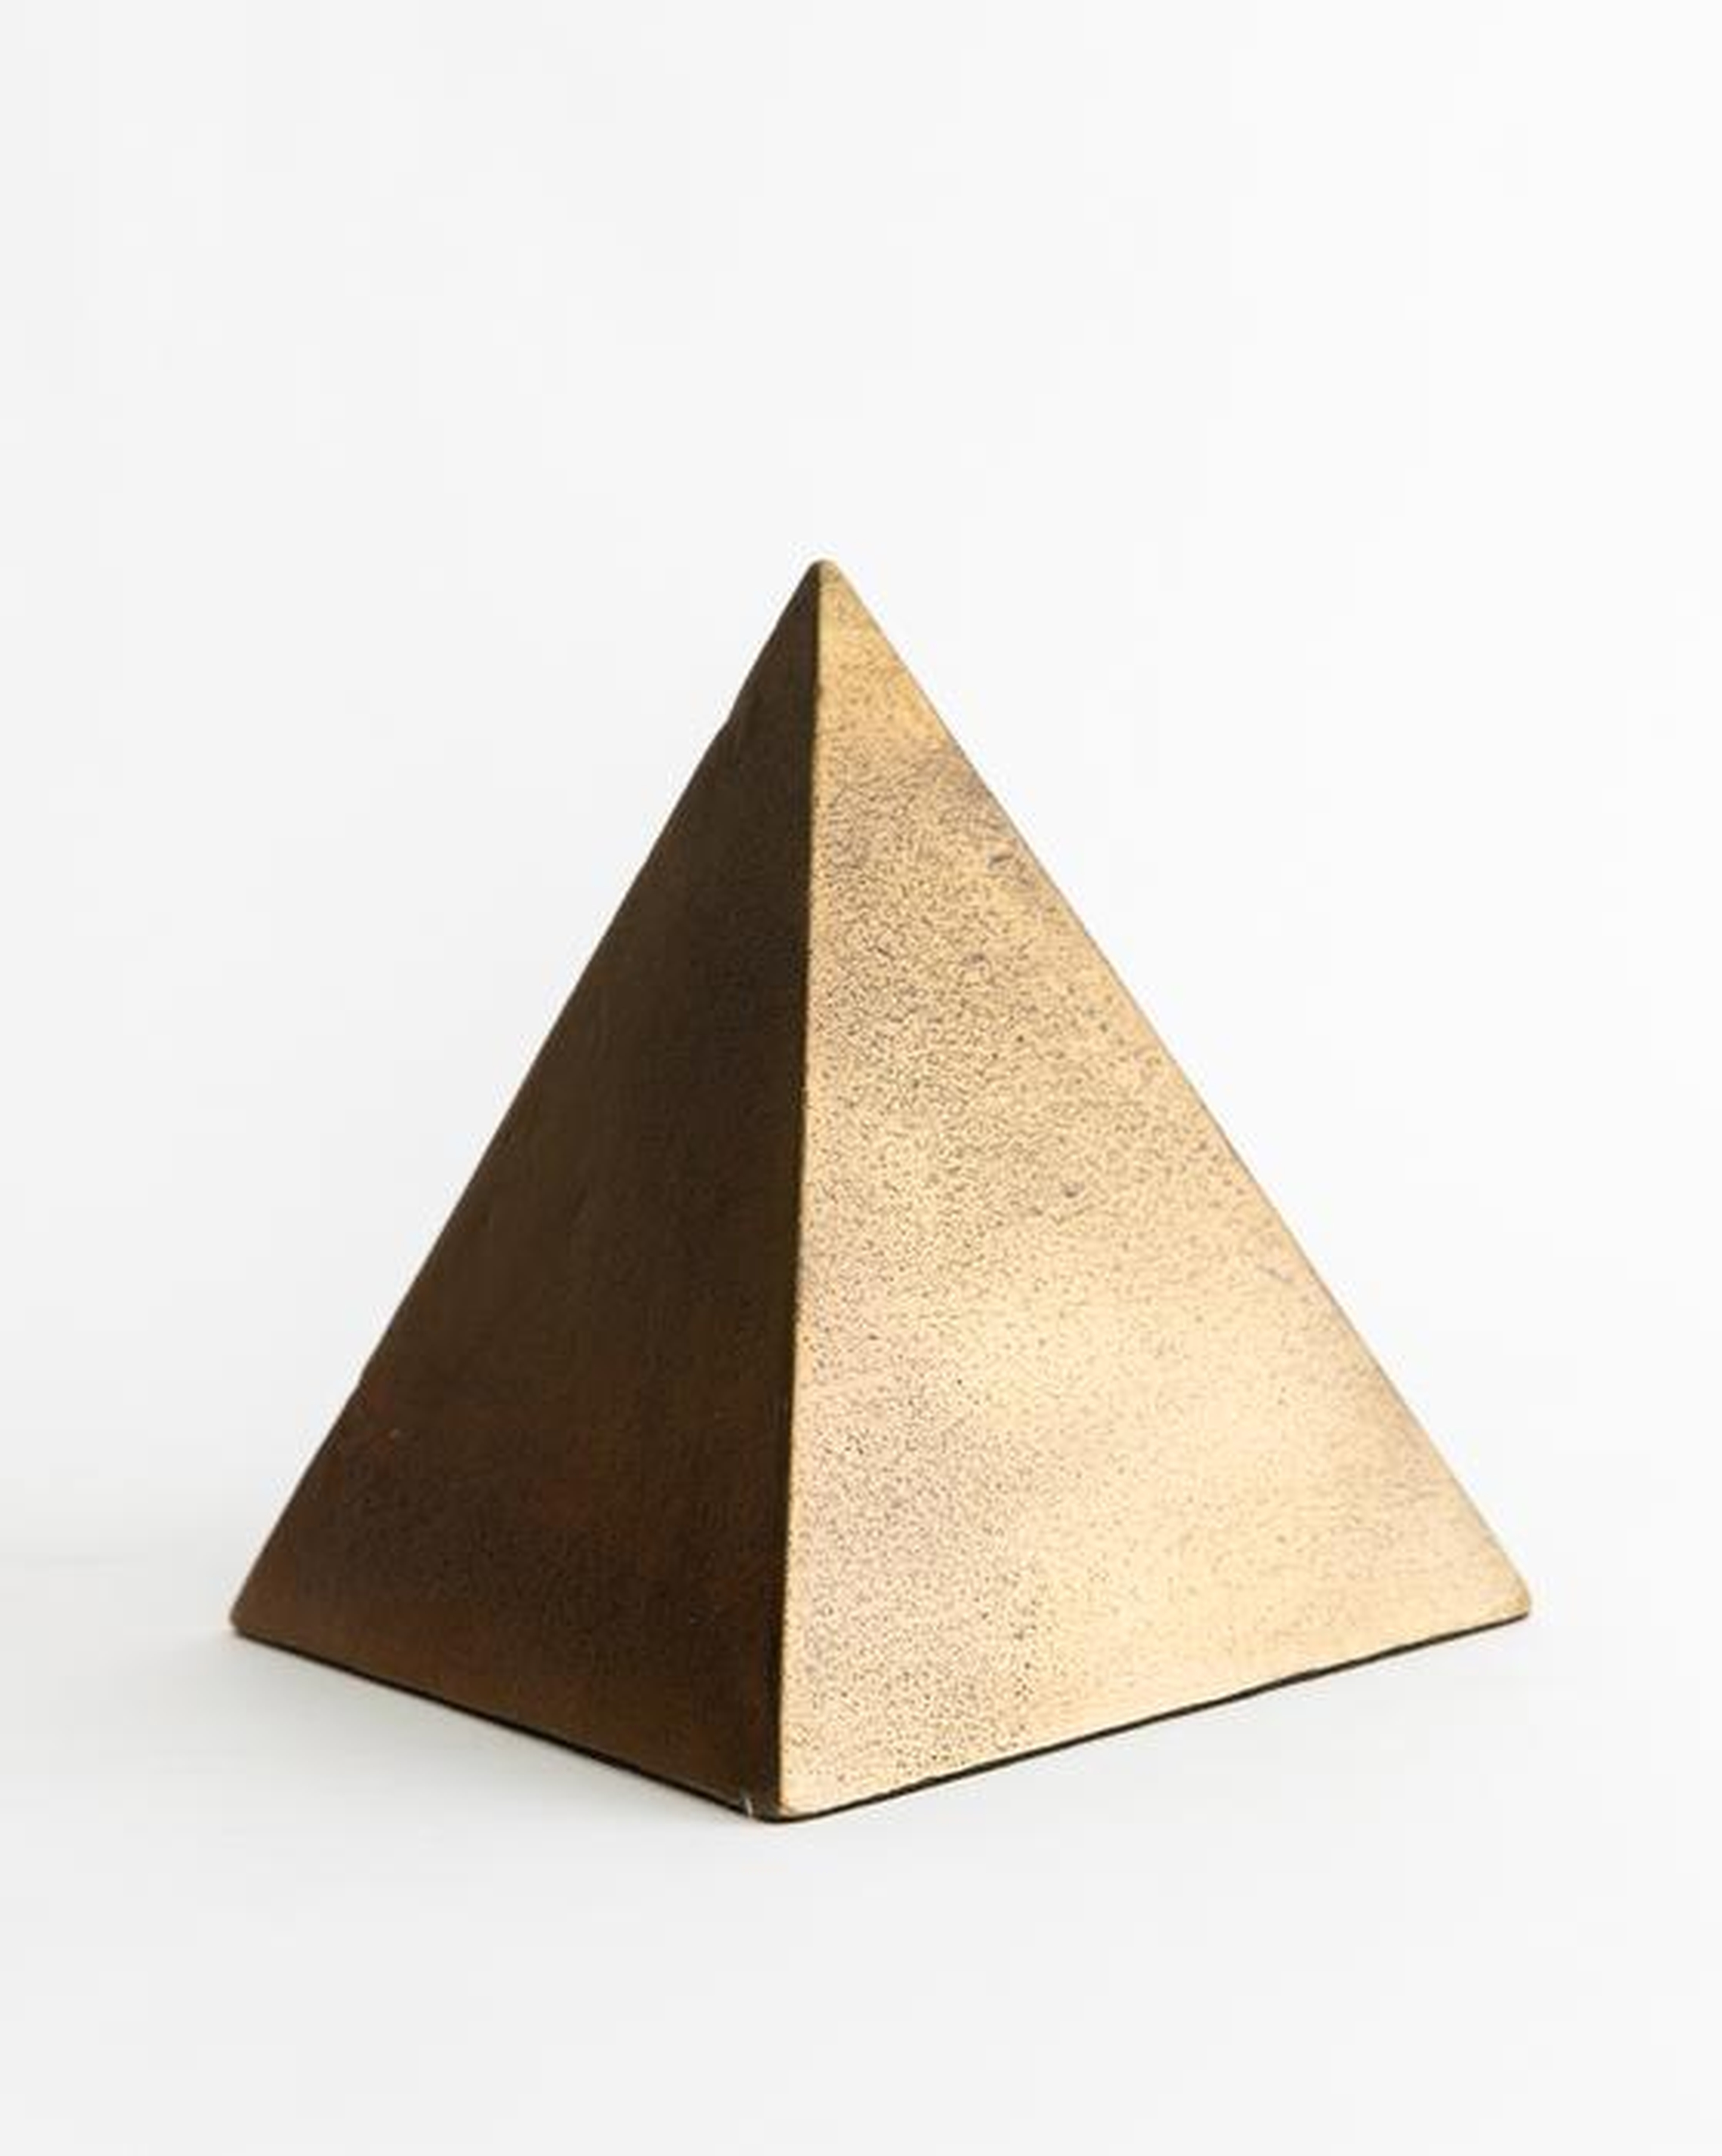 Aged Brass Pyramid, Large - McGee & Co.